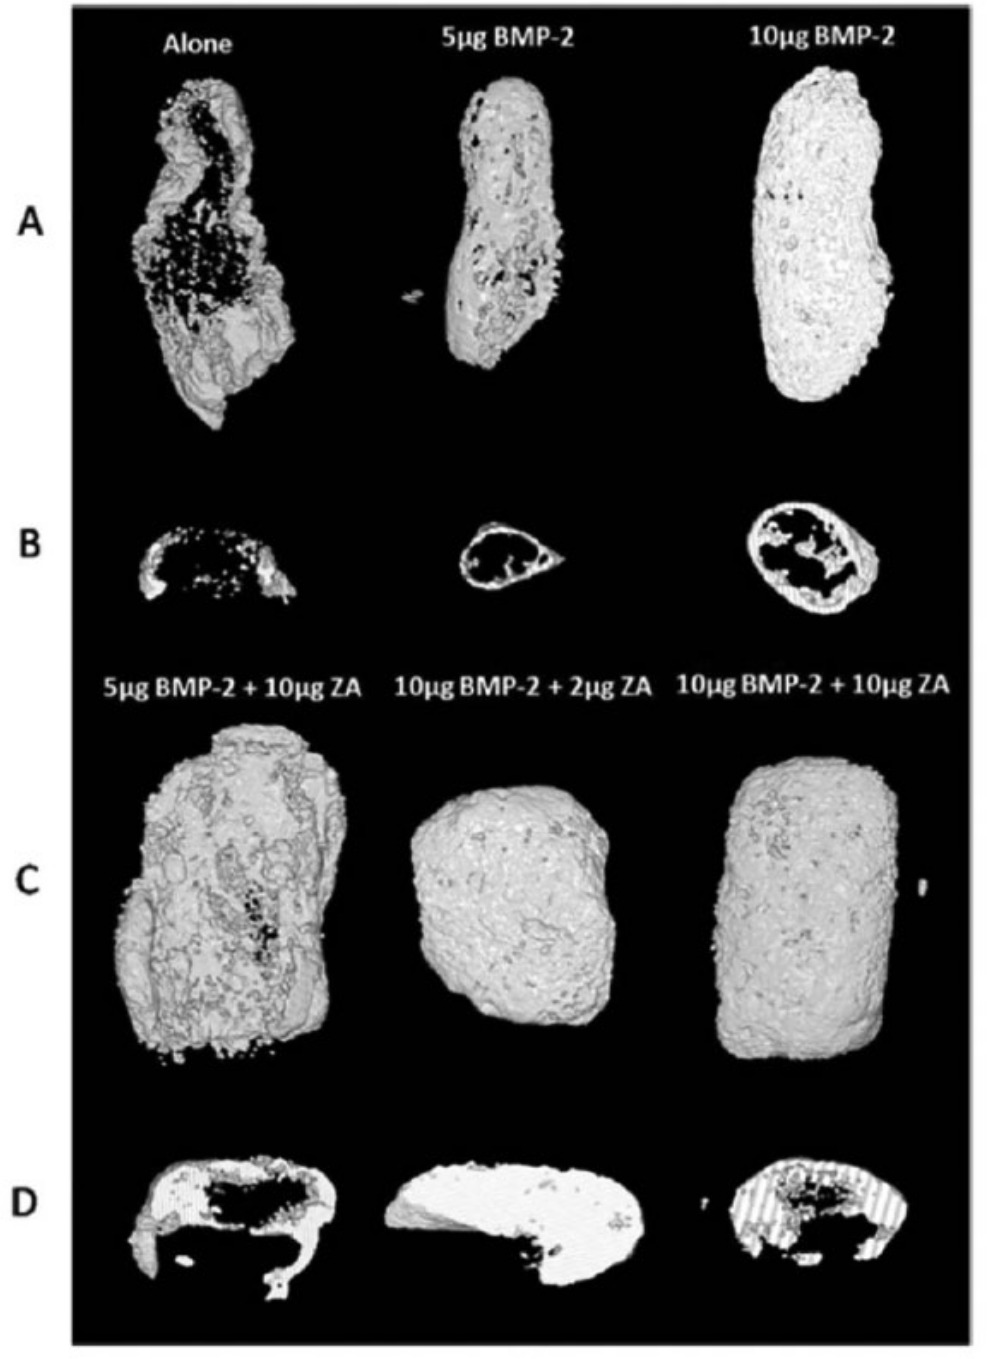 Fig. 5 
          3D rendering of the explants using micro-CT. The representative micro-CT constructs (a and b) and (c and d) show micro-CT slices (50 stack slices) of bone nodules formed from collagen-hydroxyapatite scaffolds loaded with saline, BMP-2 or BMP-2 + ZA at different concentrations. Reproduced from Murphy CM, Schindeler A, Gleeson JP, et al. A collagen-hydroxyapatite scaffold allows for binding and co-delivery of recombinant bone morphogenetic proteins and bisphosphonates. Acta Biomater 2014;10:2250–2258 (with permission from Elsevier).
        